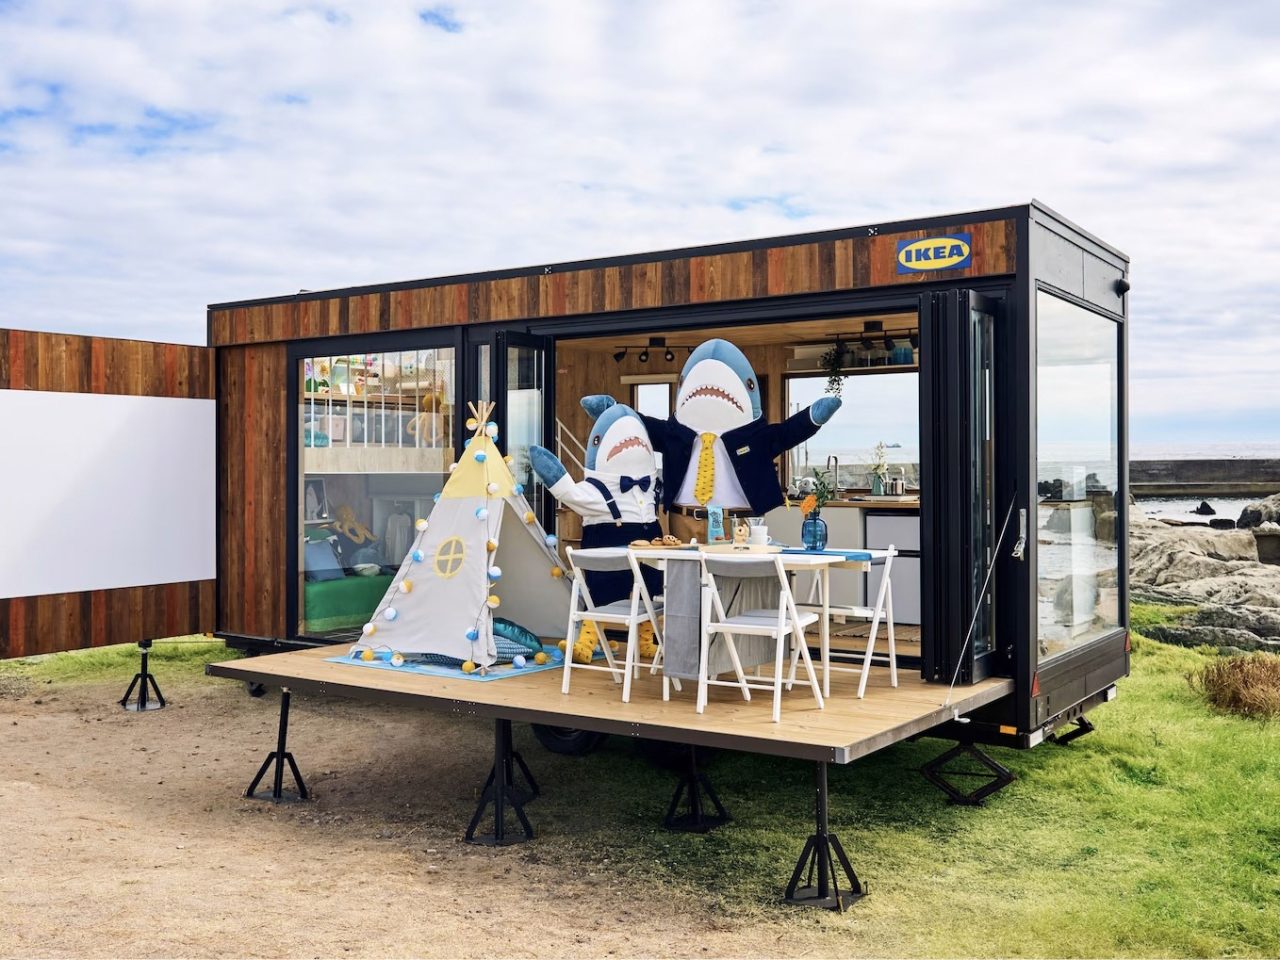 Two people dressed in shark costumes standing in front of a small wooden trailer with an IKEA sign on the wall.